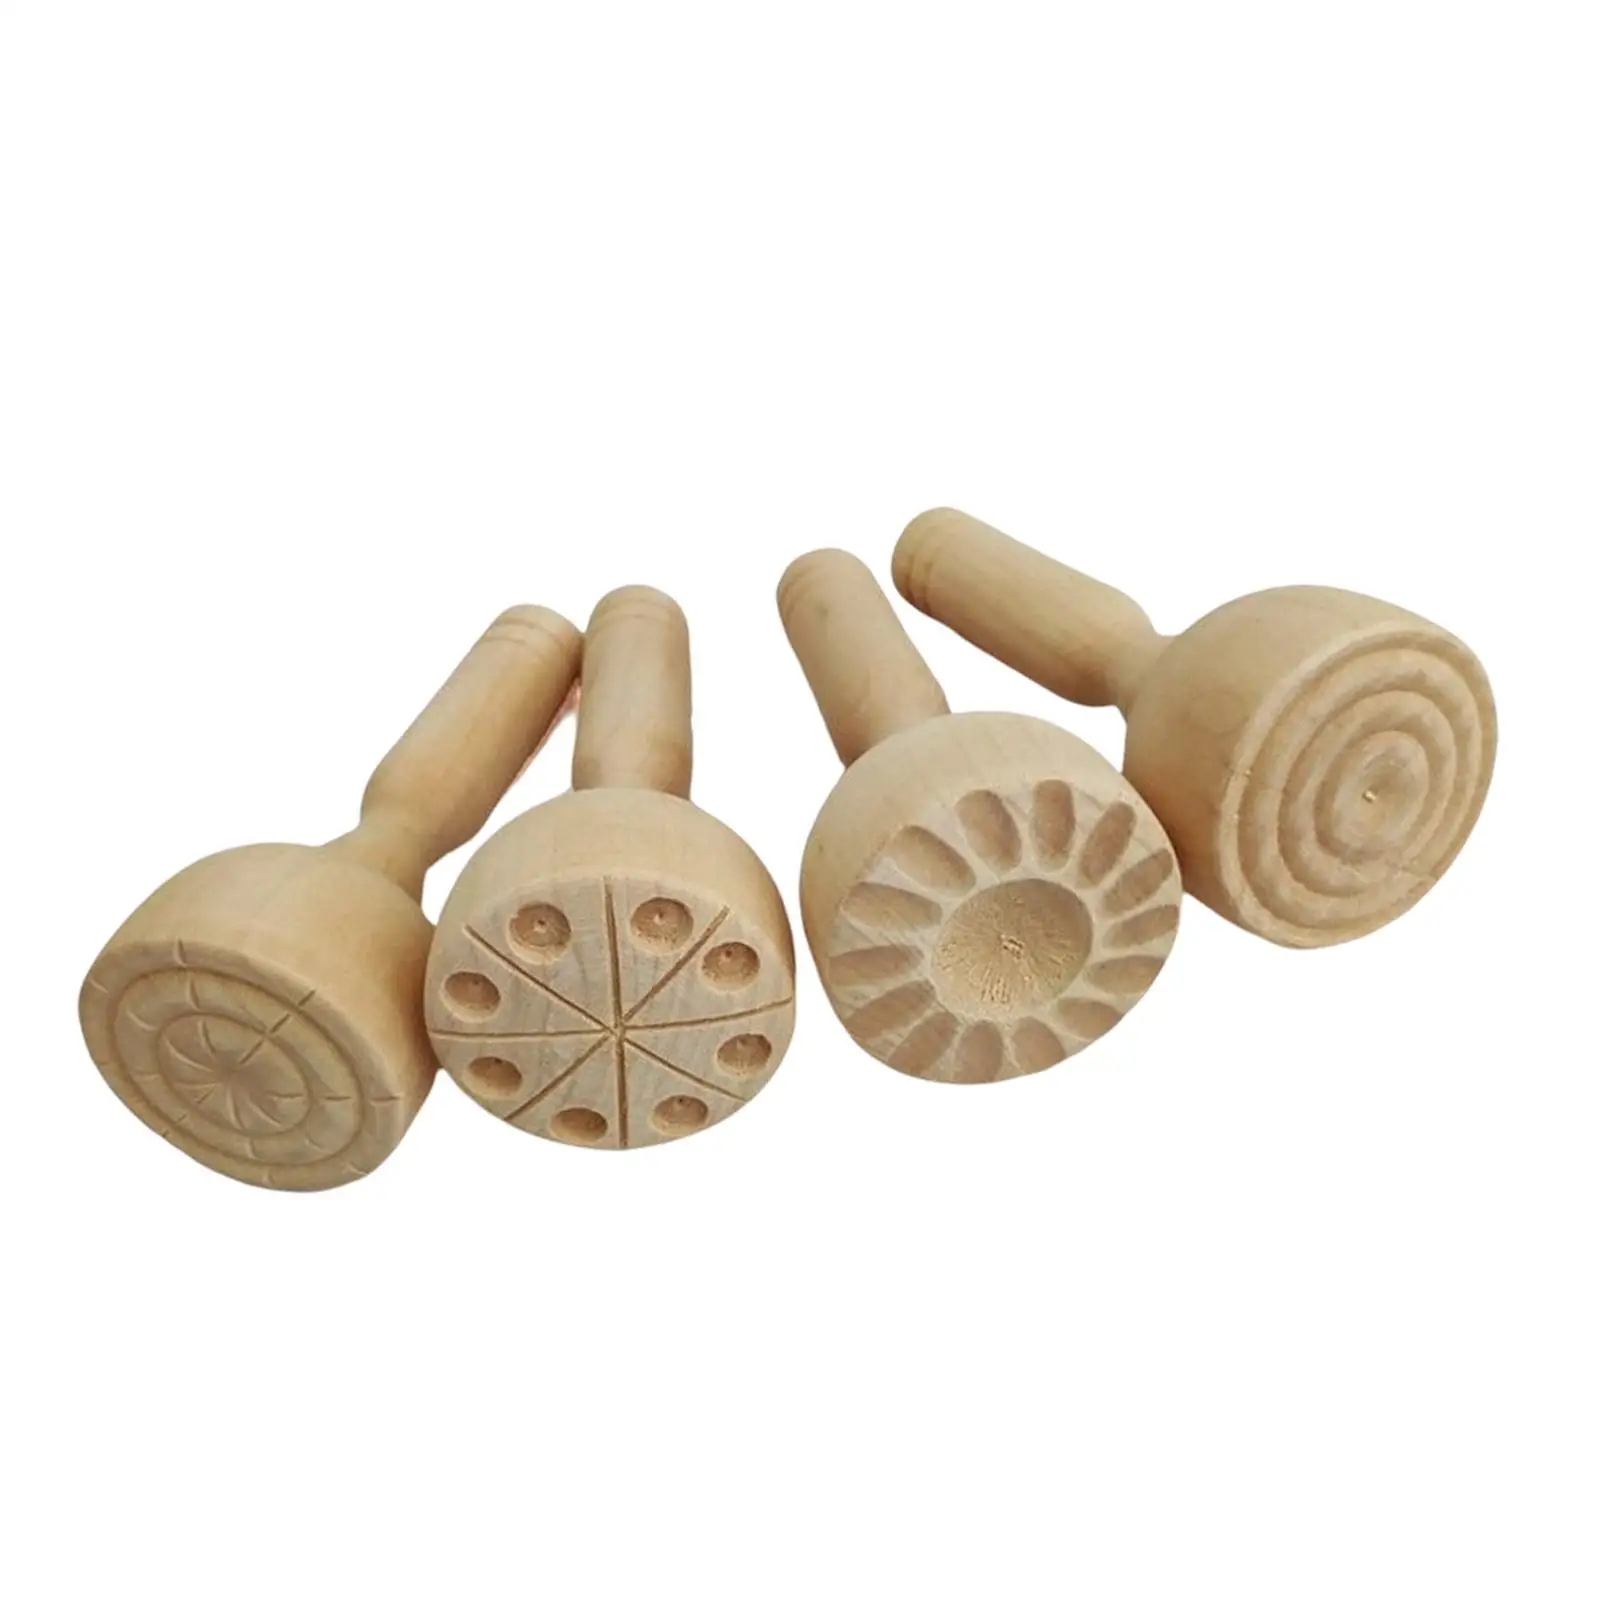 4 Pieces Traditional Wooden seal Molds Tools Making Molds mould Supplies for Art Craft Activity Supplies Child